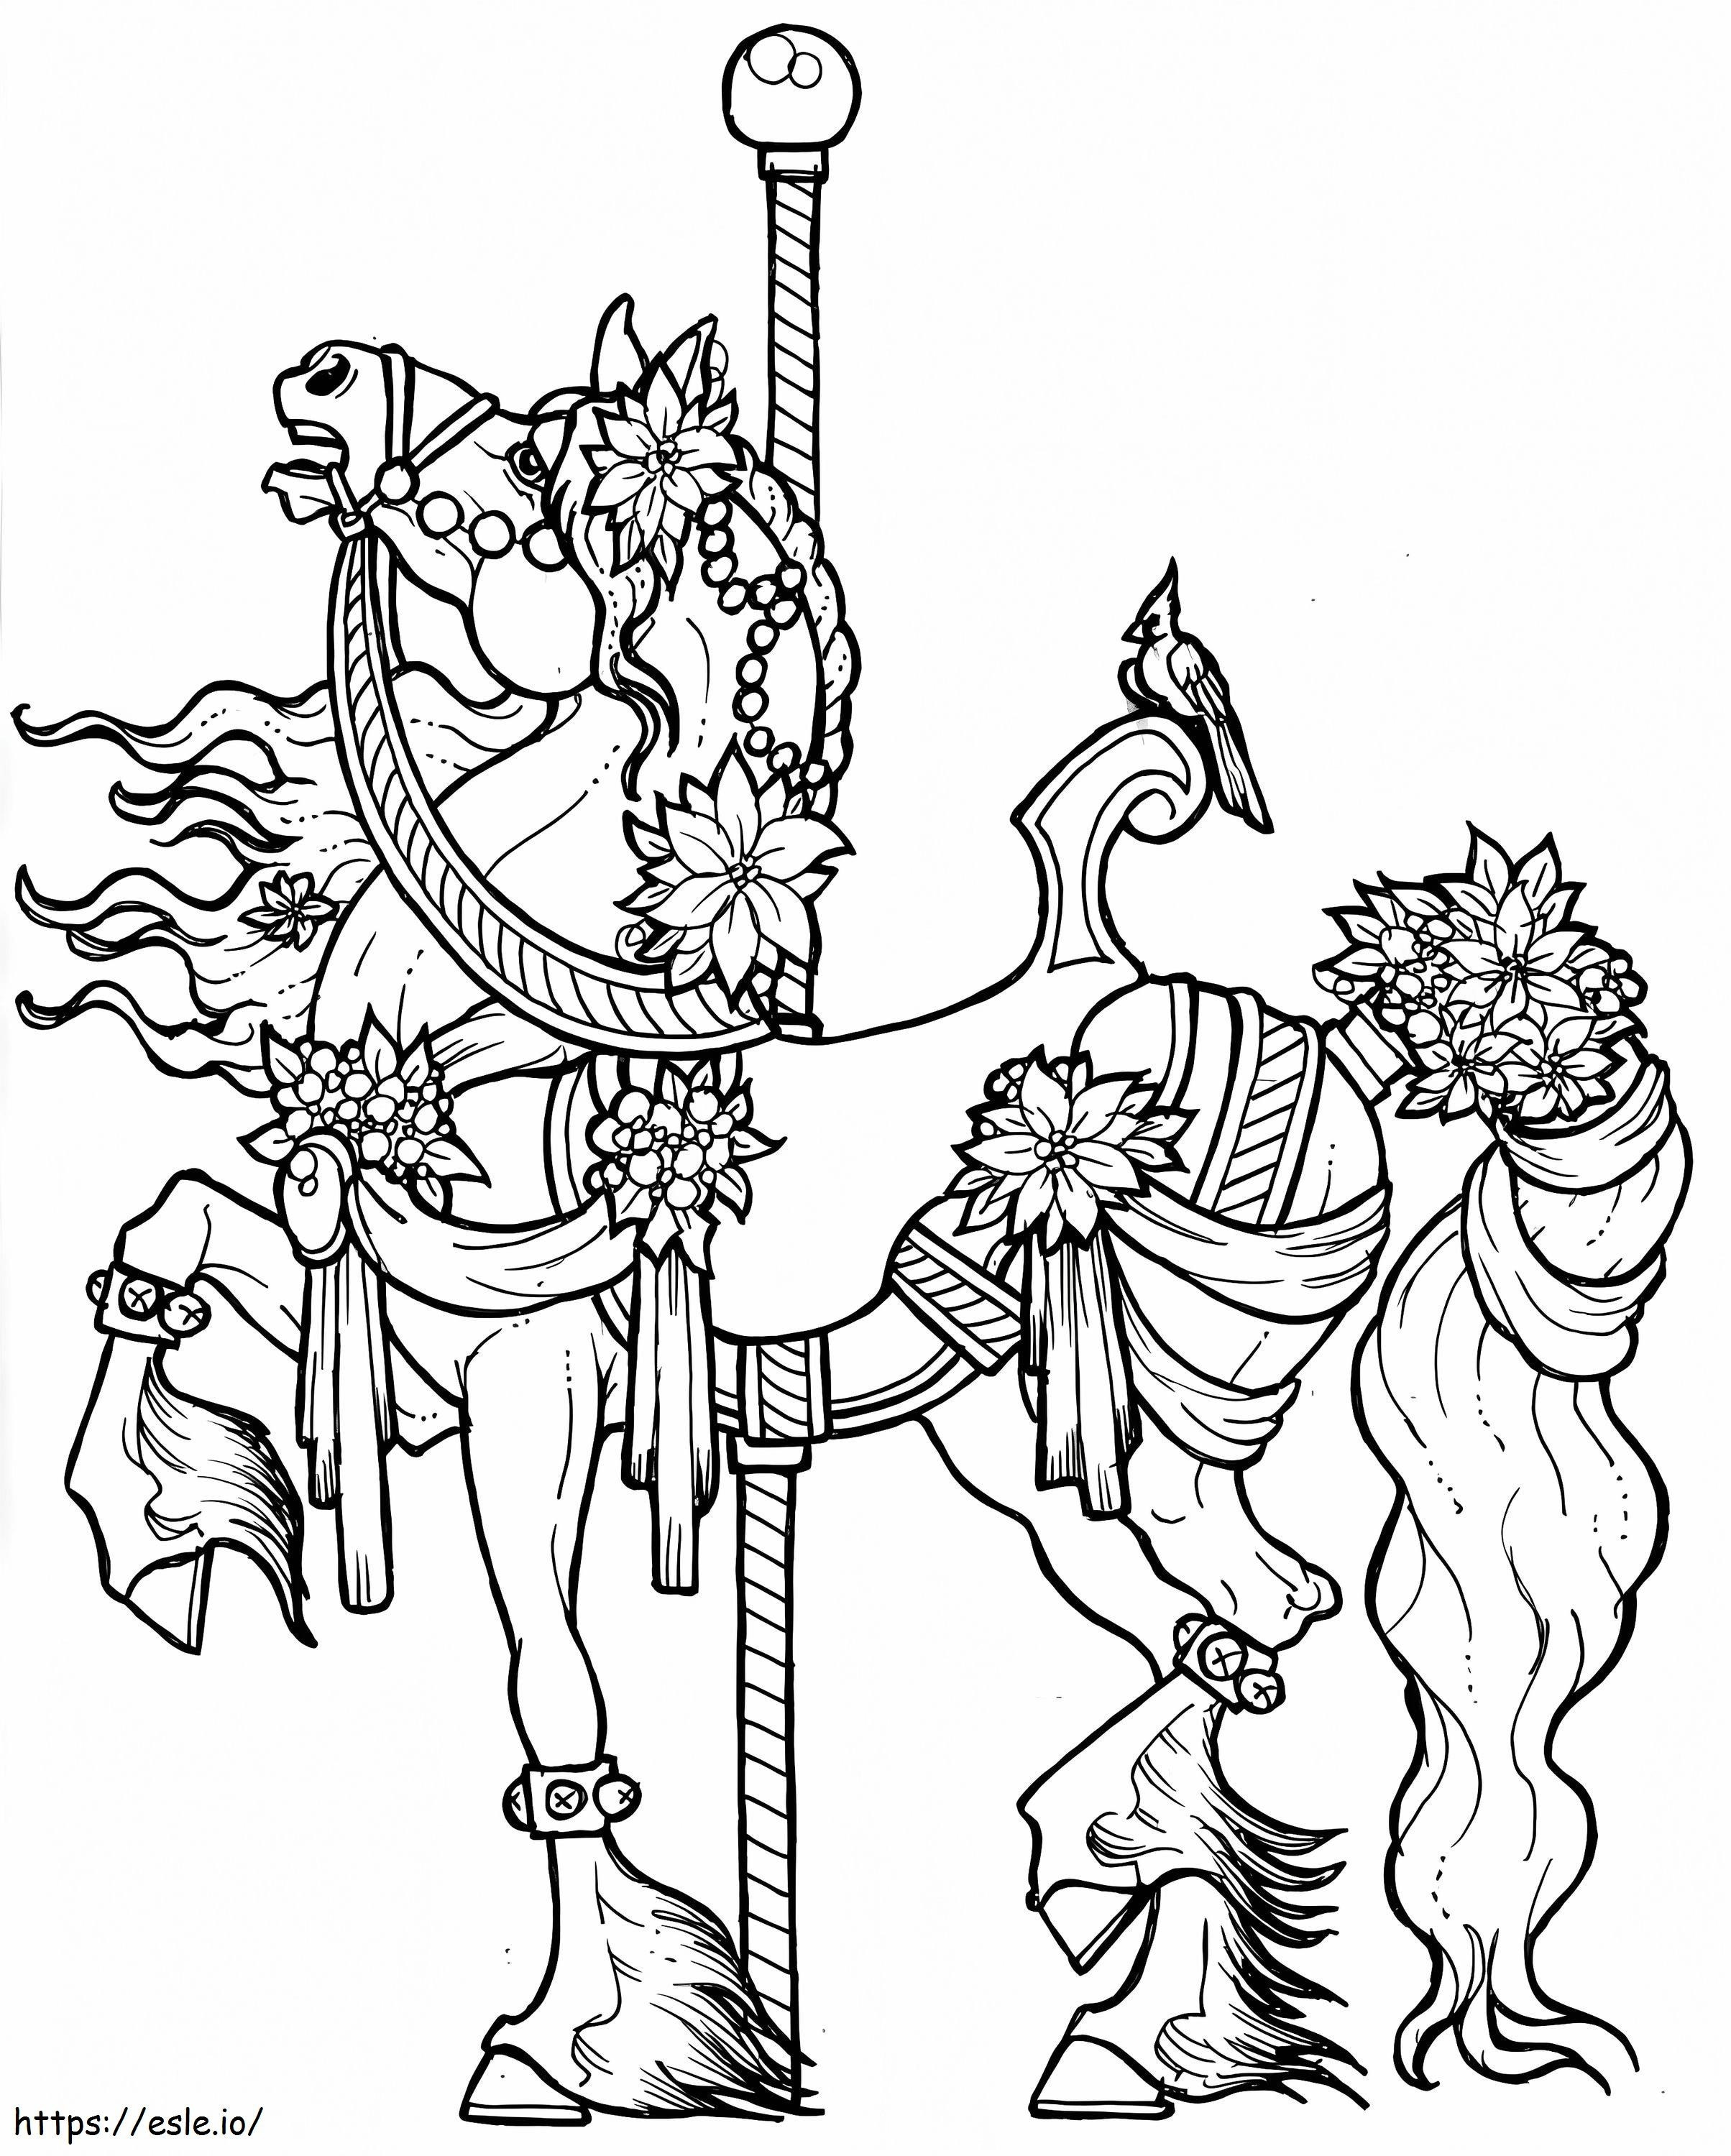 Carousel Horse coloring page